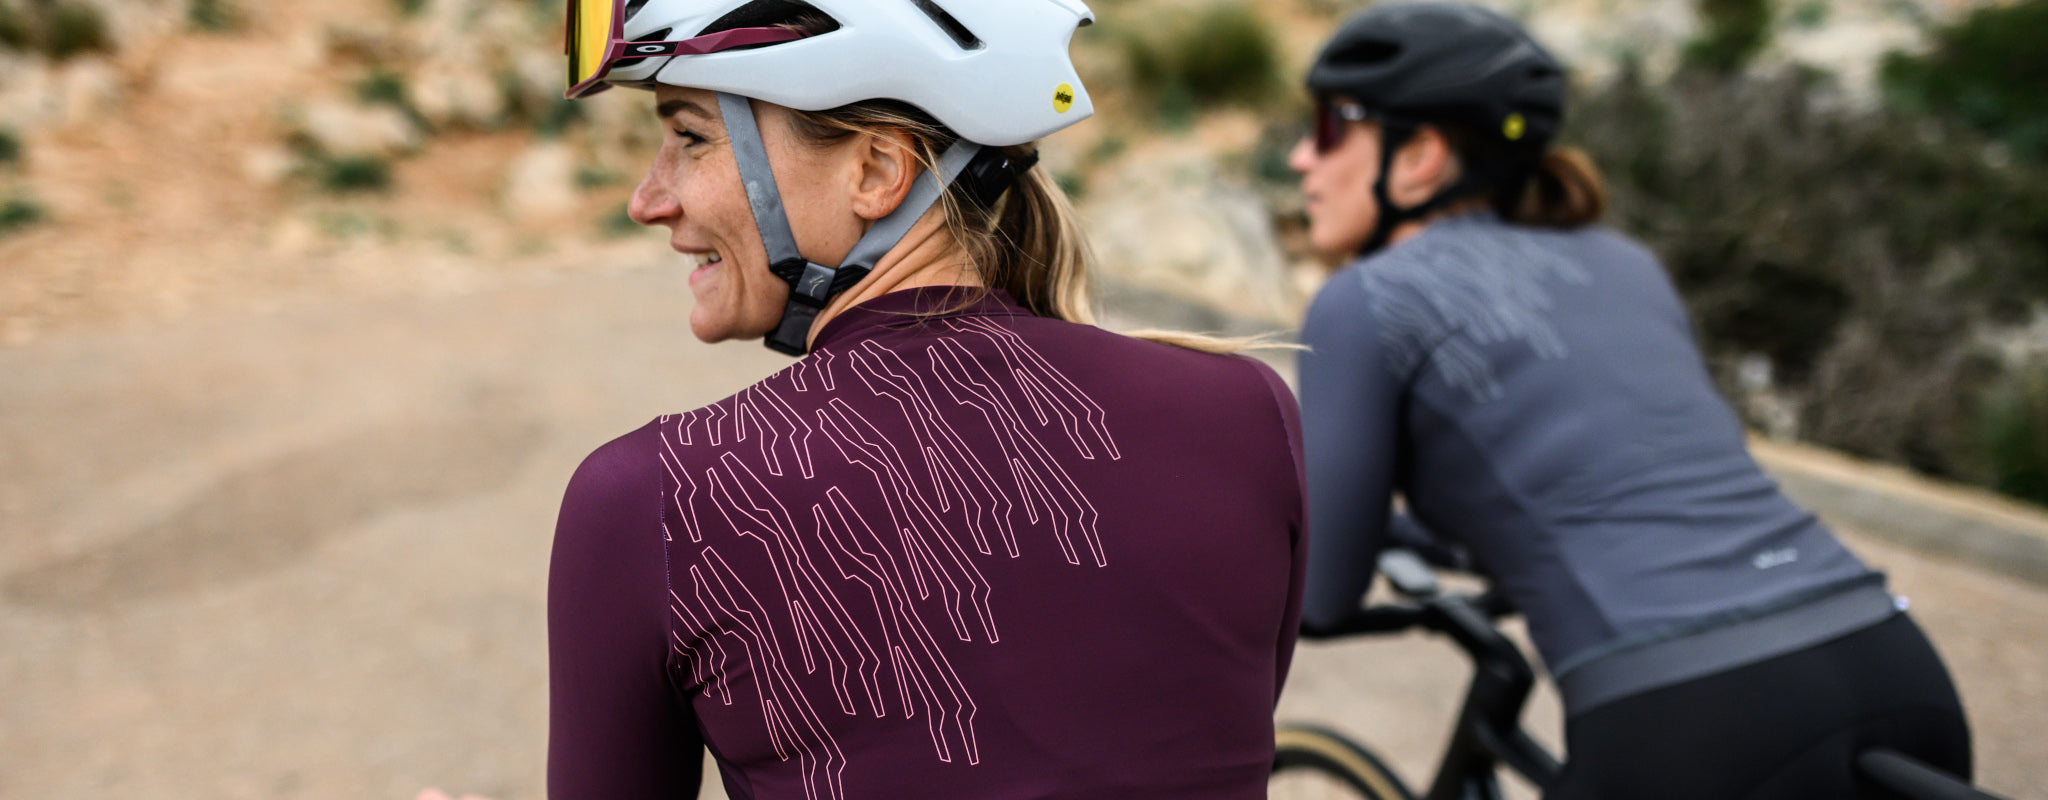 boutique cycling clothing